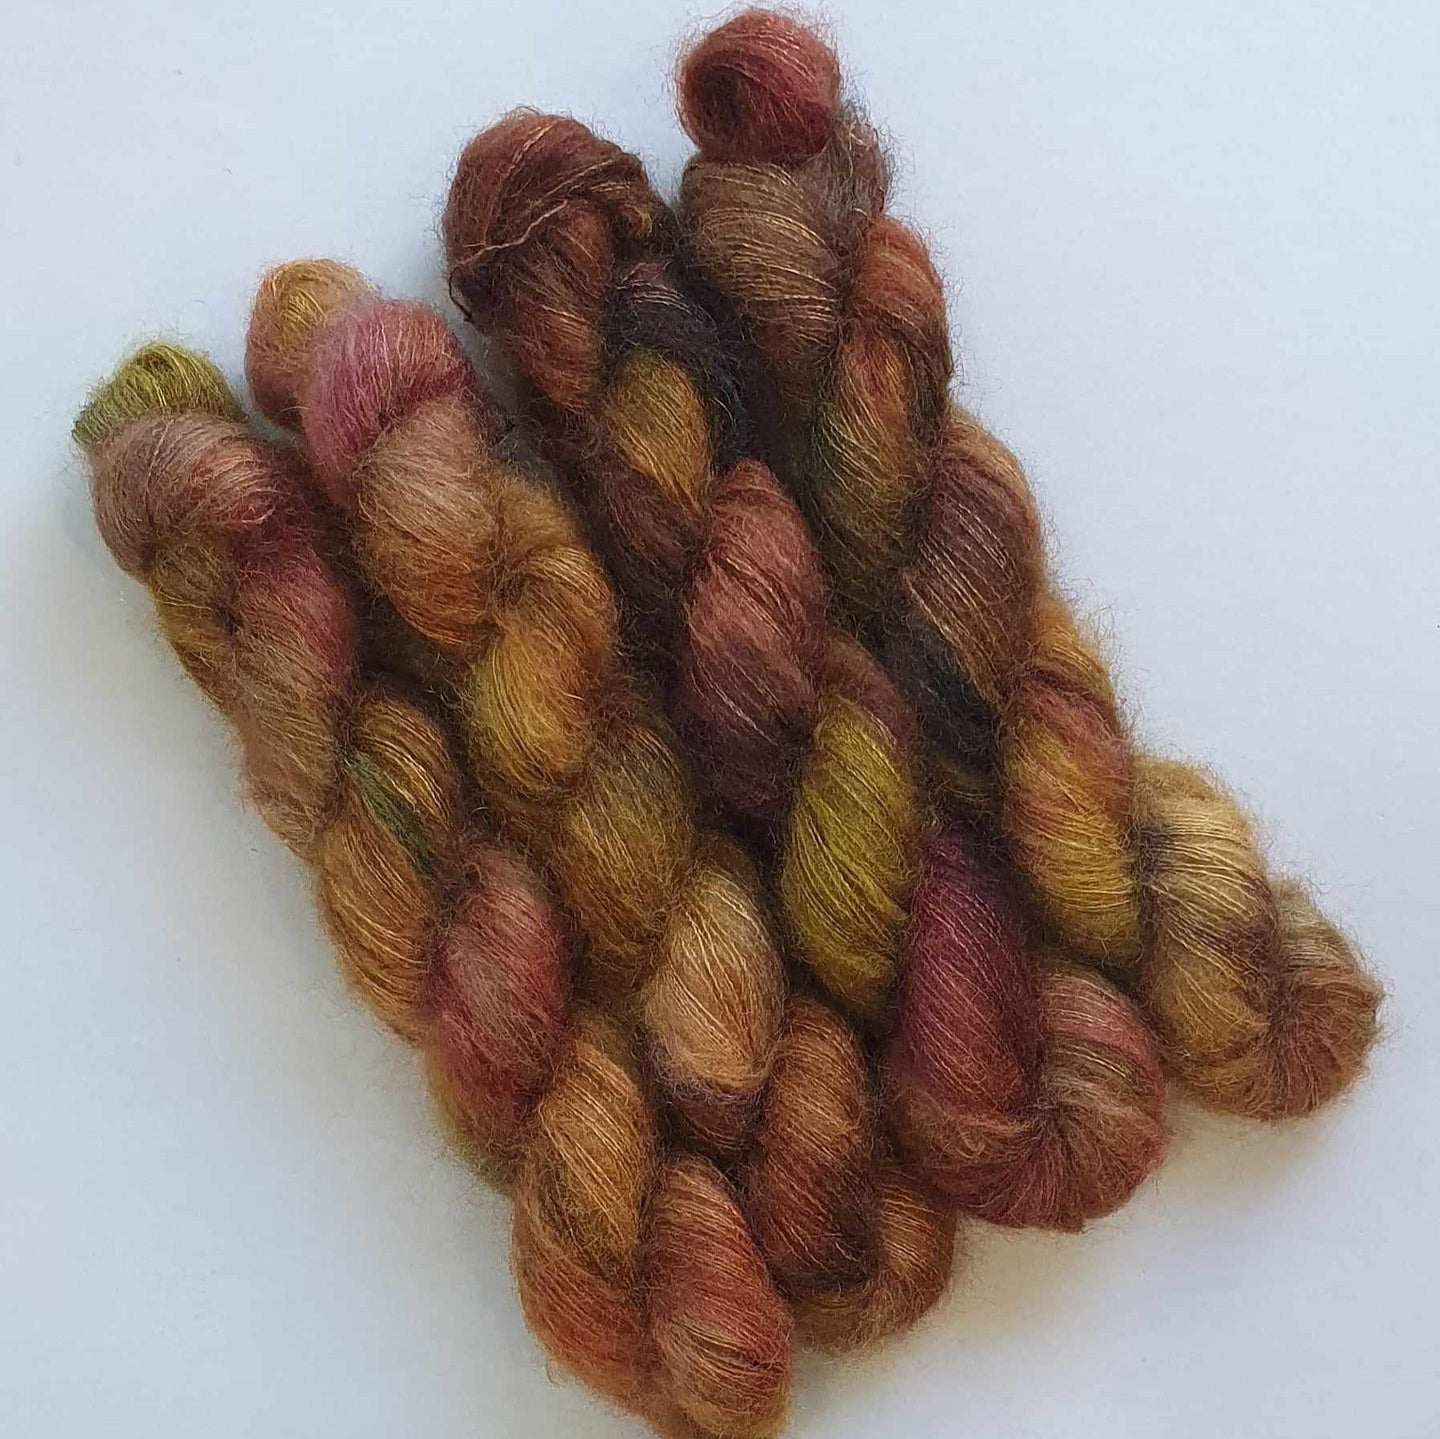 Sedimentary (Sylph Lace 2ply - Kid Mohair/Mulberry Silk)